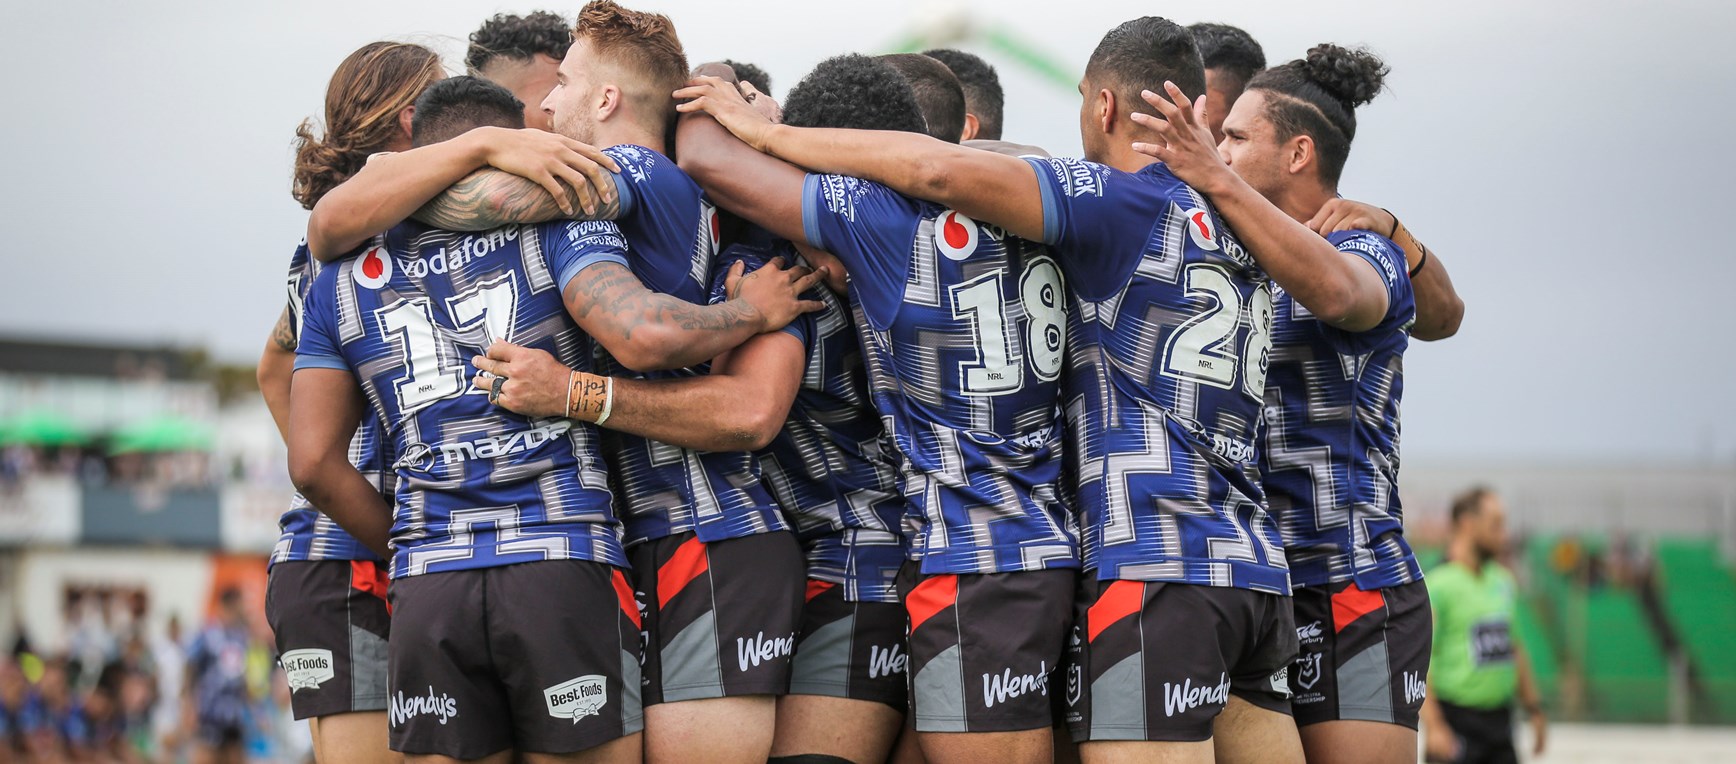 In Photos: Game day in Palmerston North